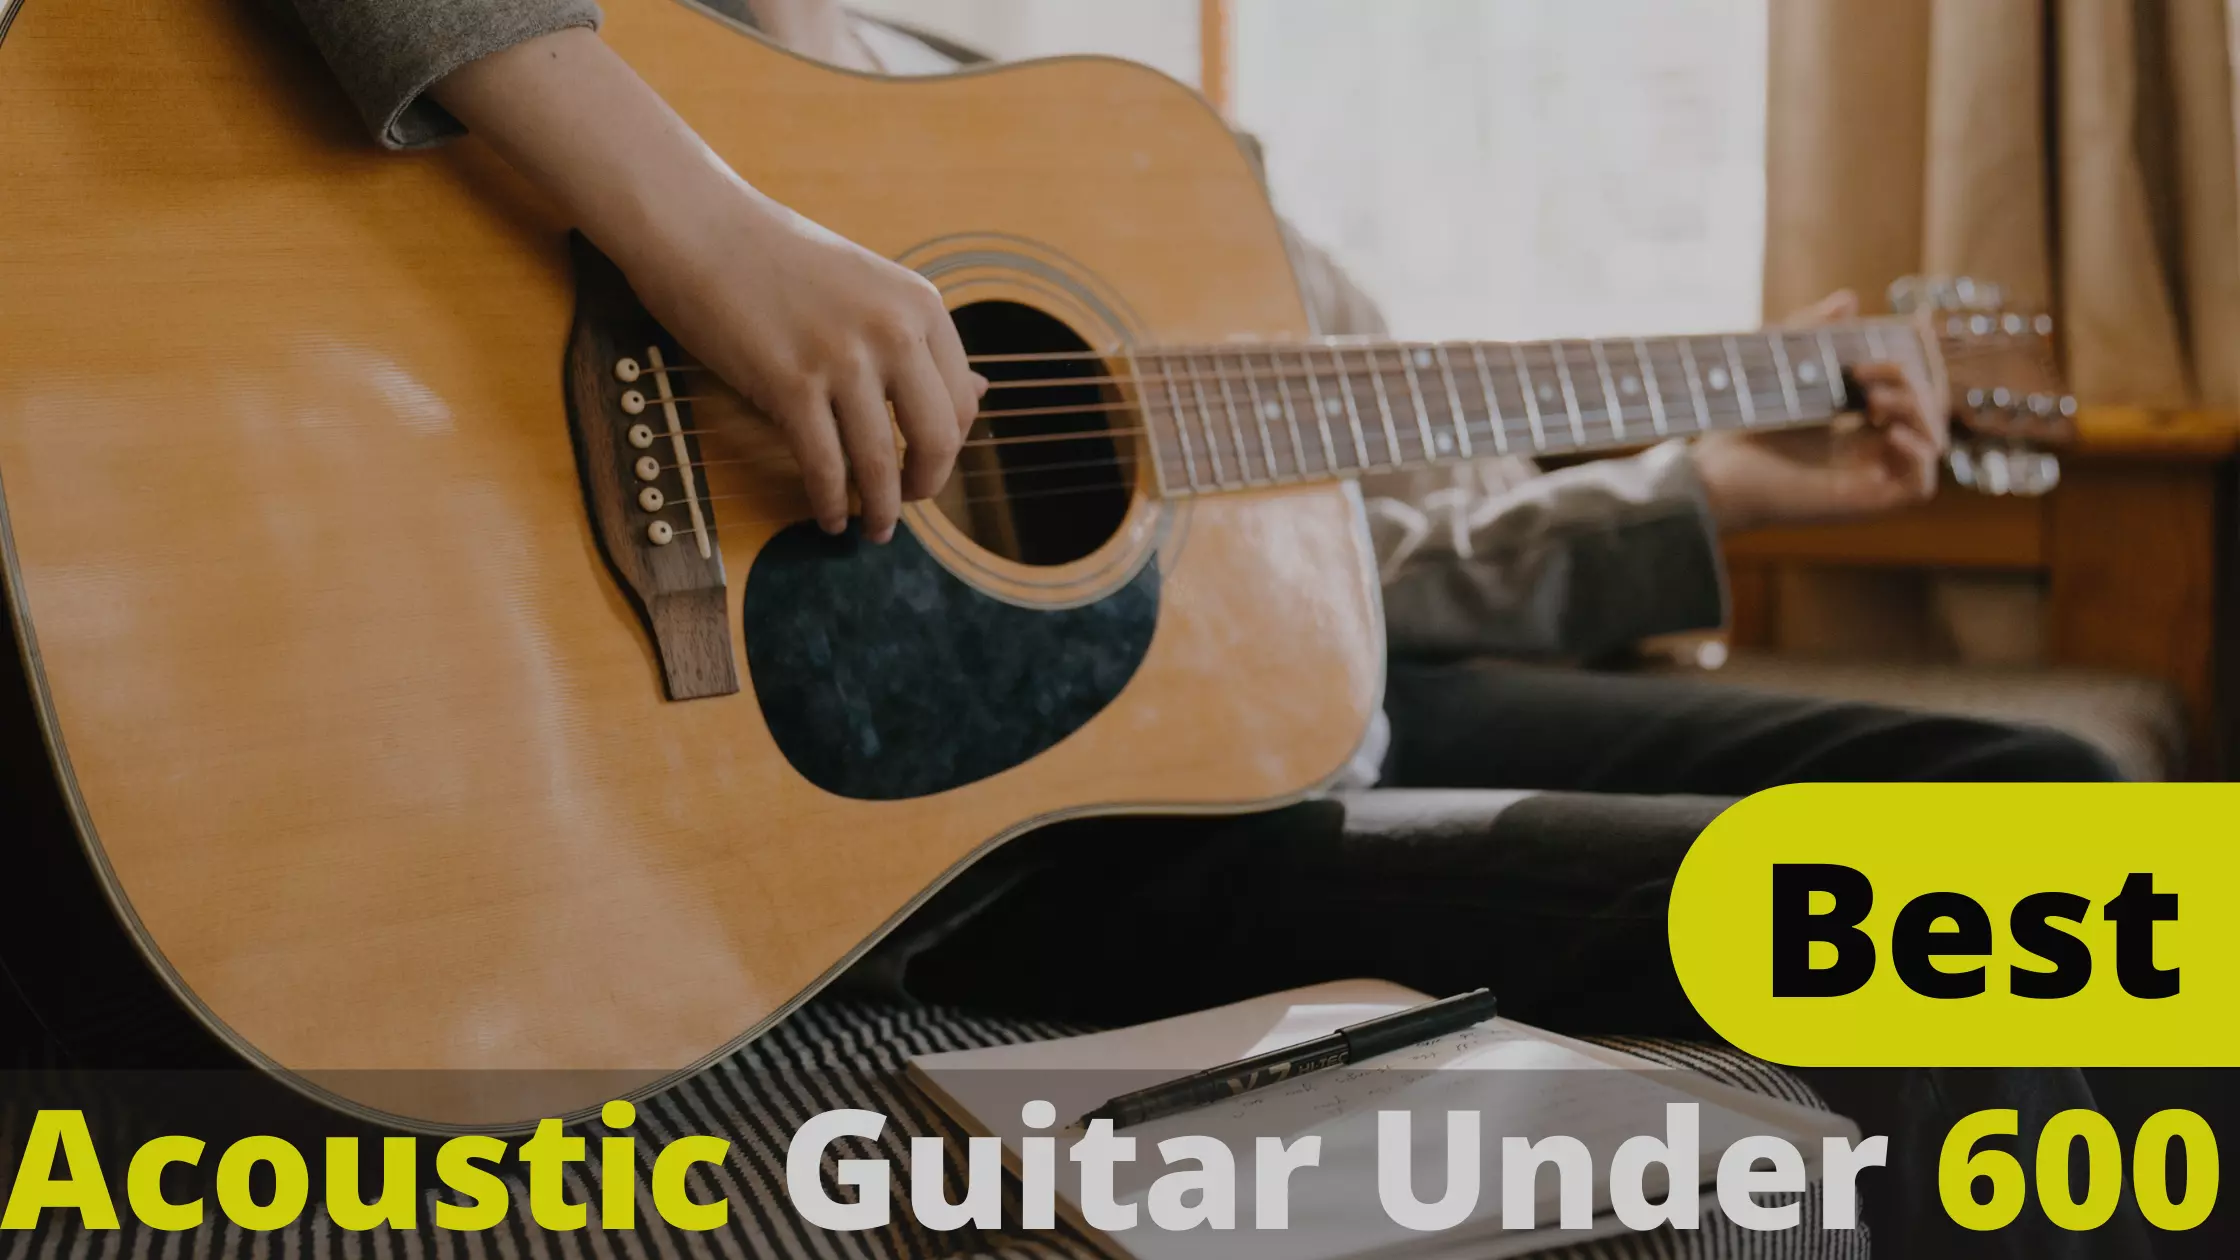 Best Acoustic Guitar Under 600 - Buying Guide And Reviews 